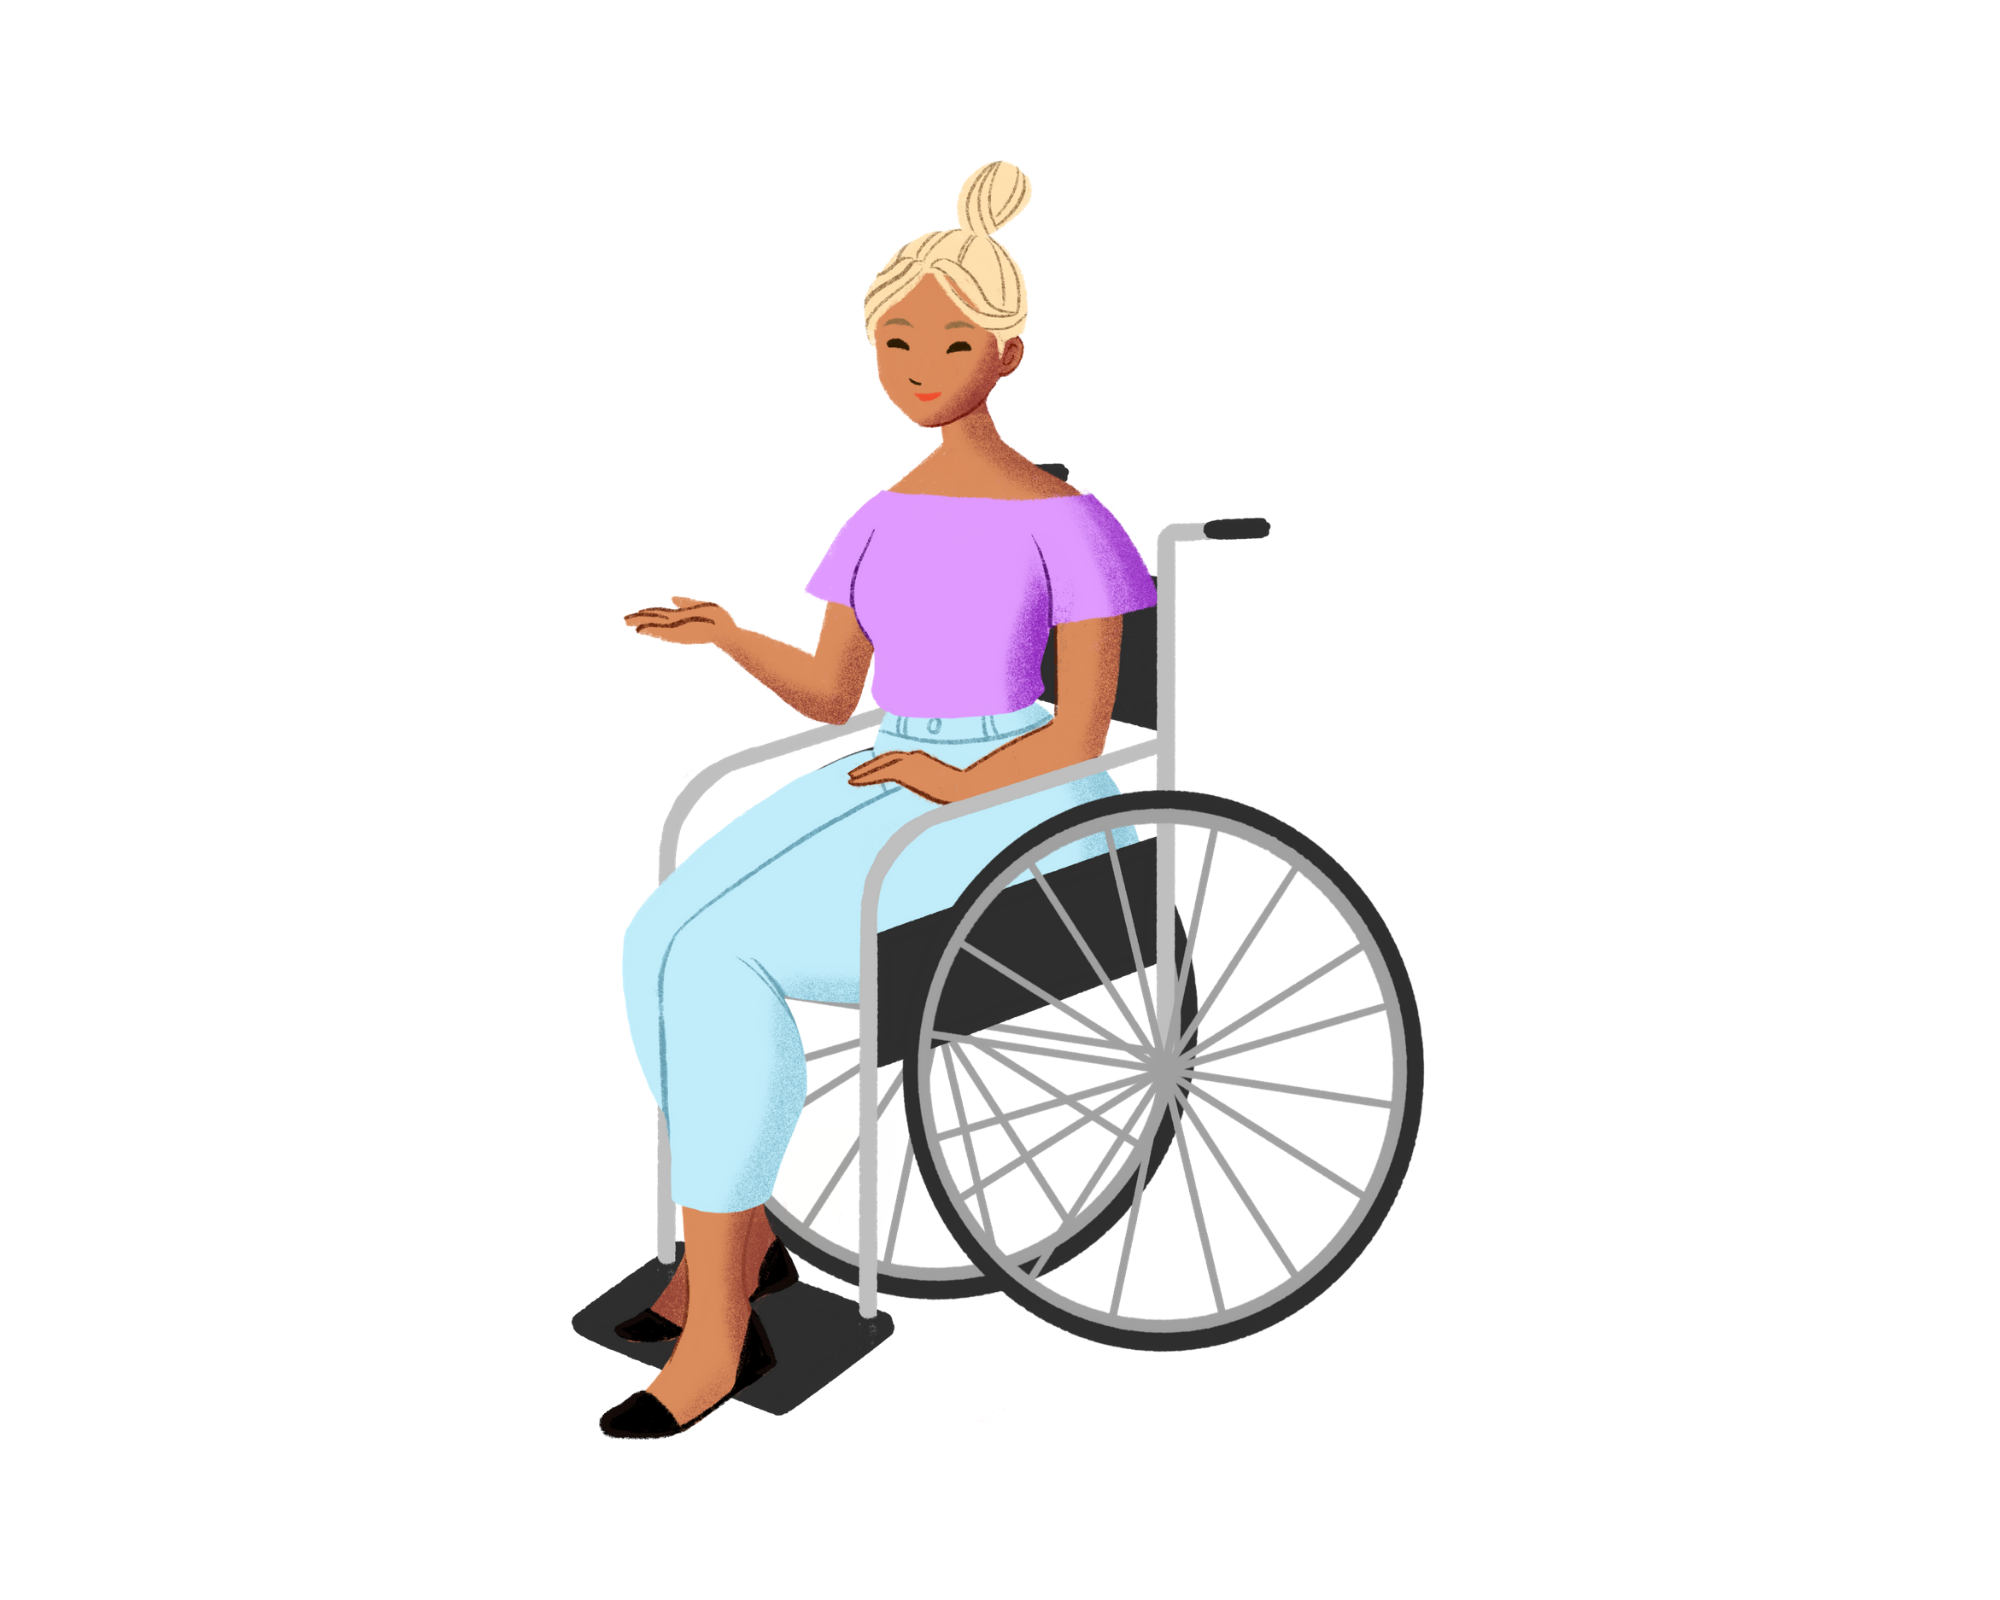 Animation image of a wheel-chair bound person